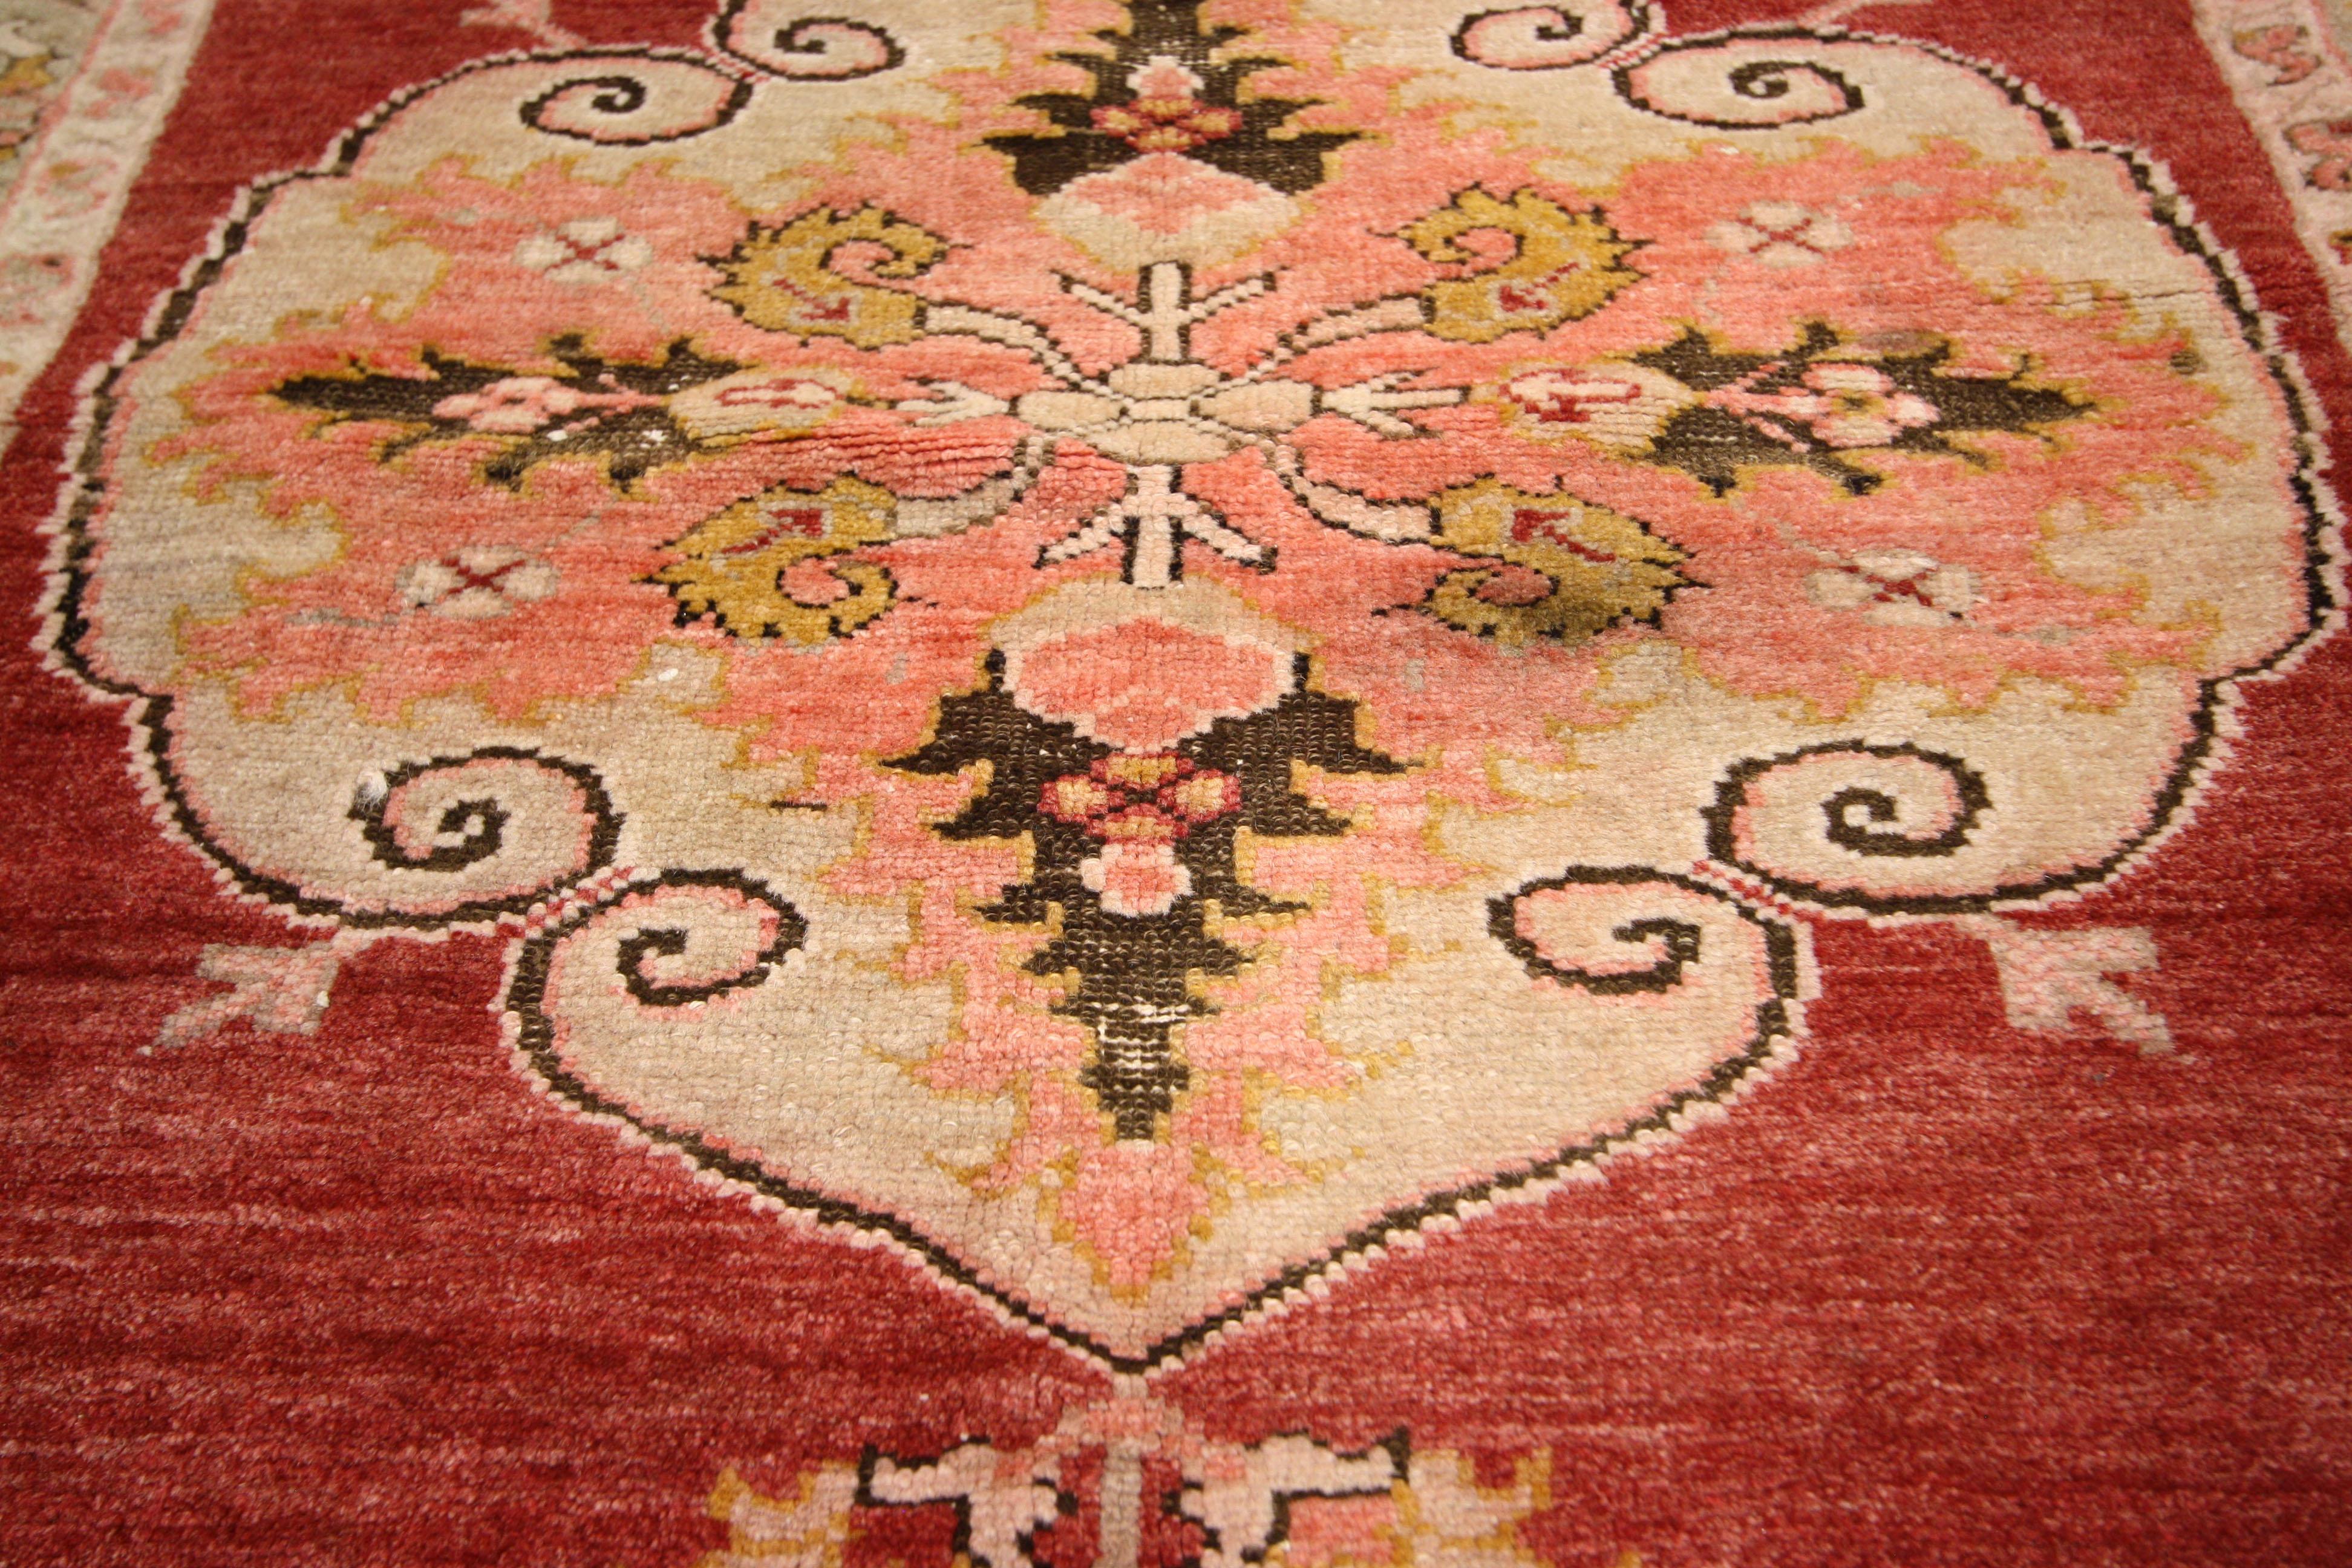 52317, vintage Turkish Oushak rug for kitchen, bath, foyer or entryway or prayer rug. This hand-knotted wool vintage Turkish Oushak rug features a modern traditional style. Immersed in Anatolian history and refined colors, this vintage Oushak rug